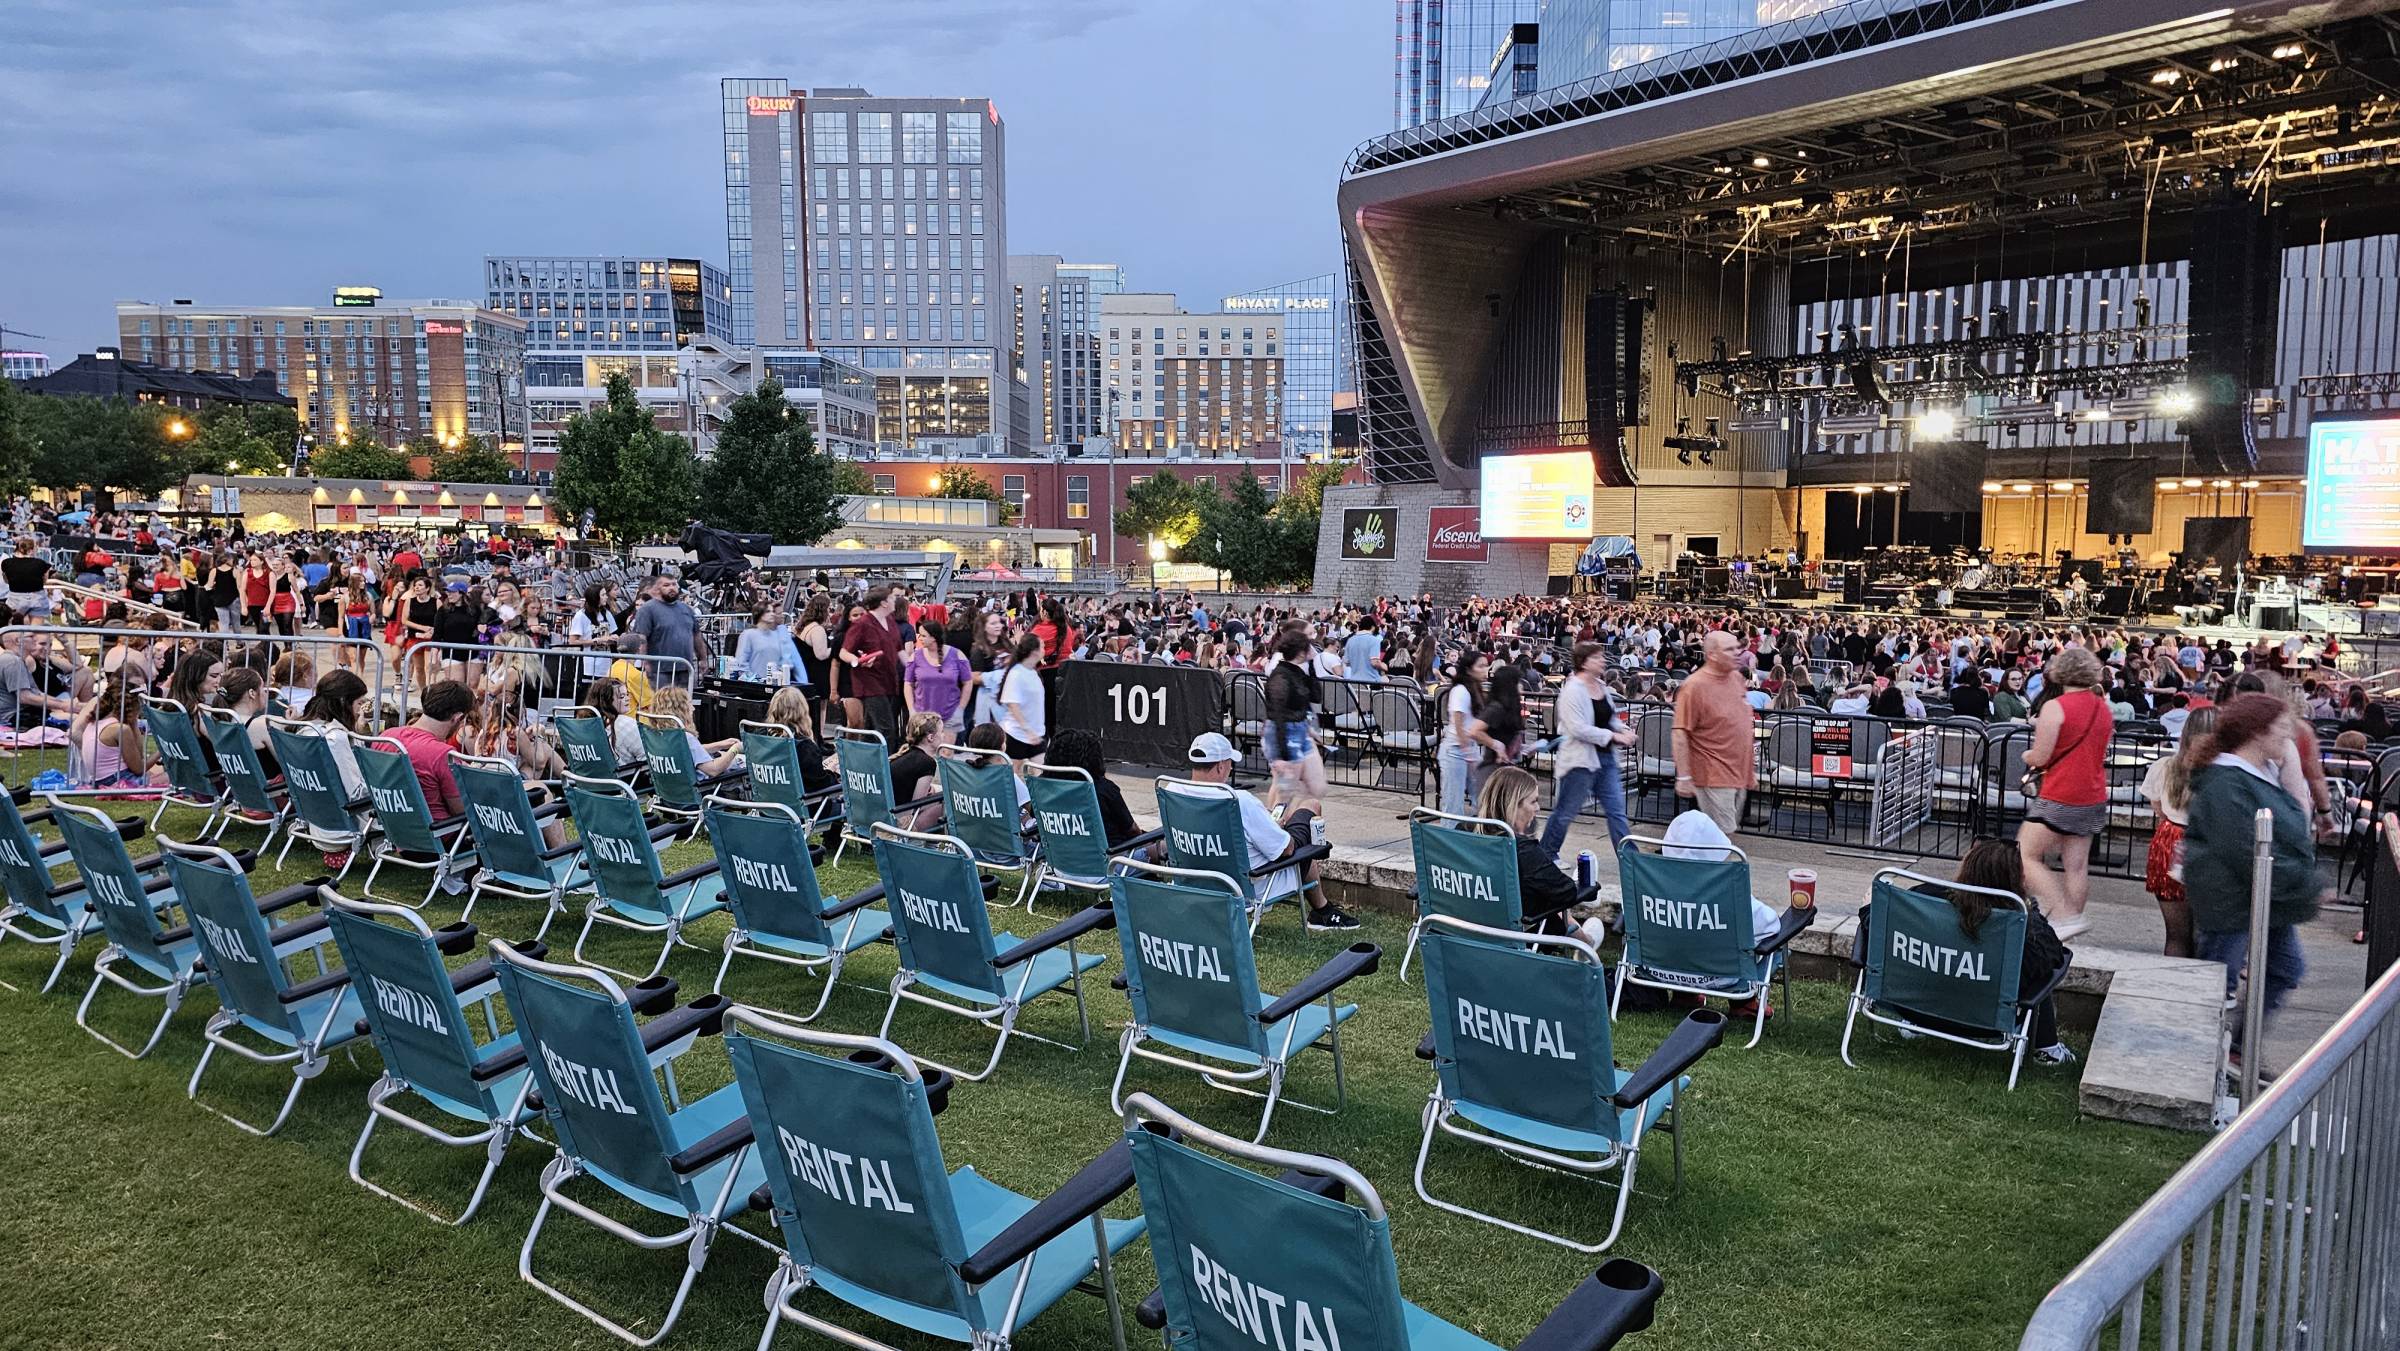 Ascend Amphitheater Seating View Cabinets Matttroy